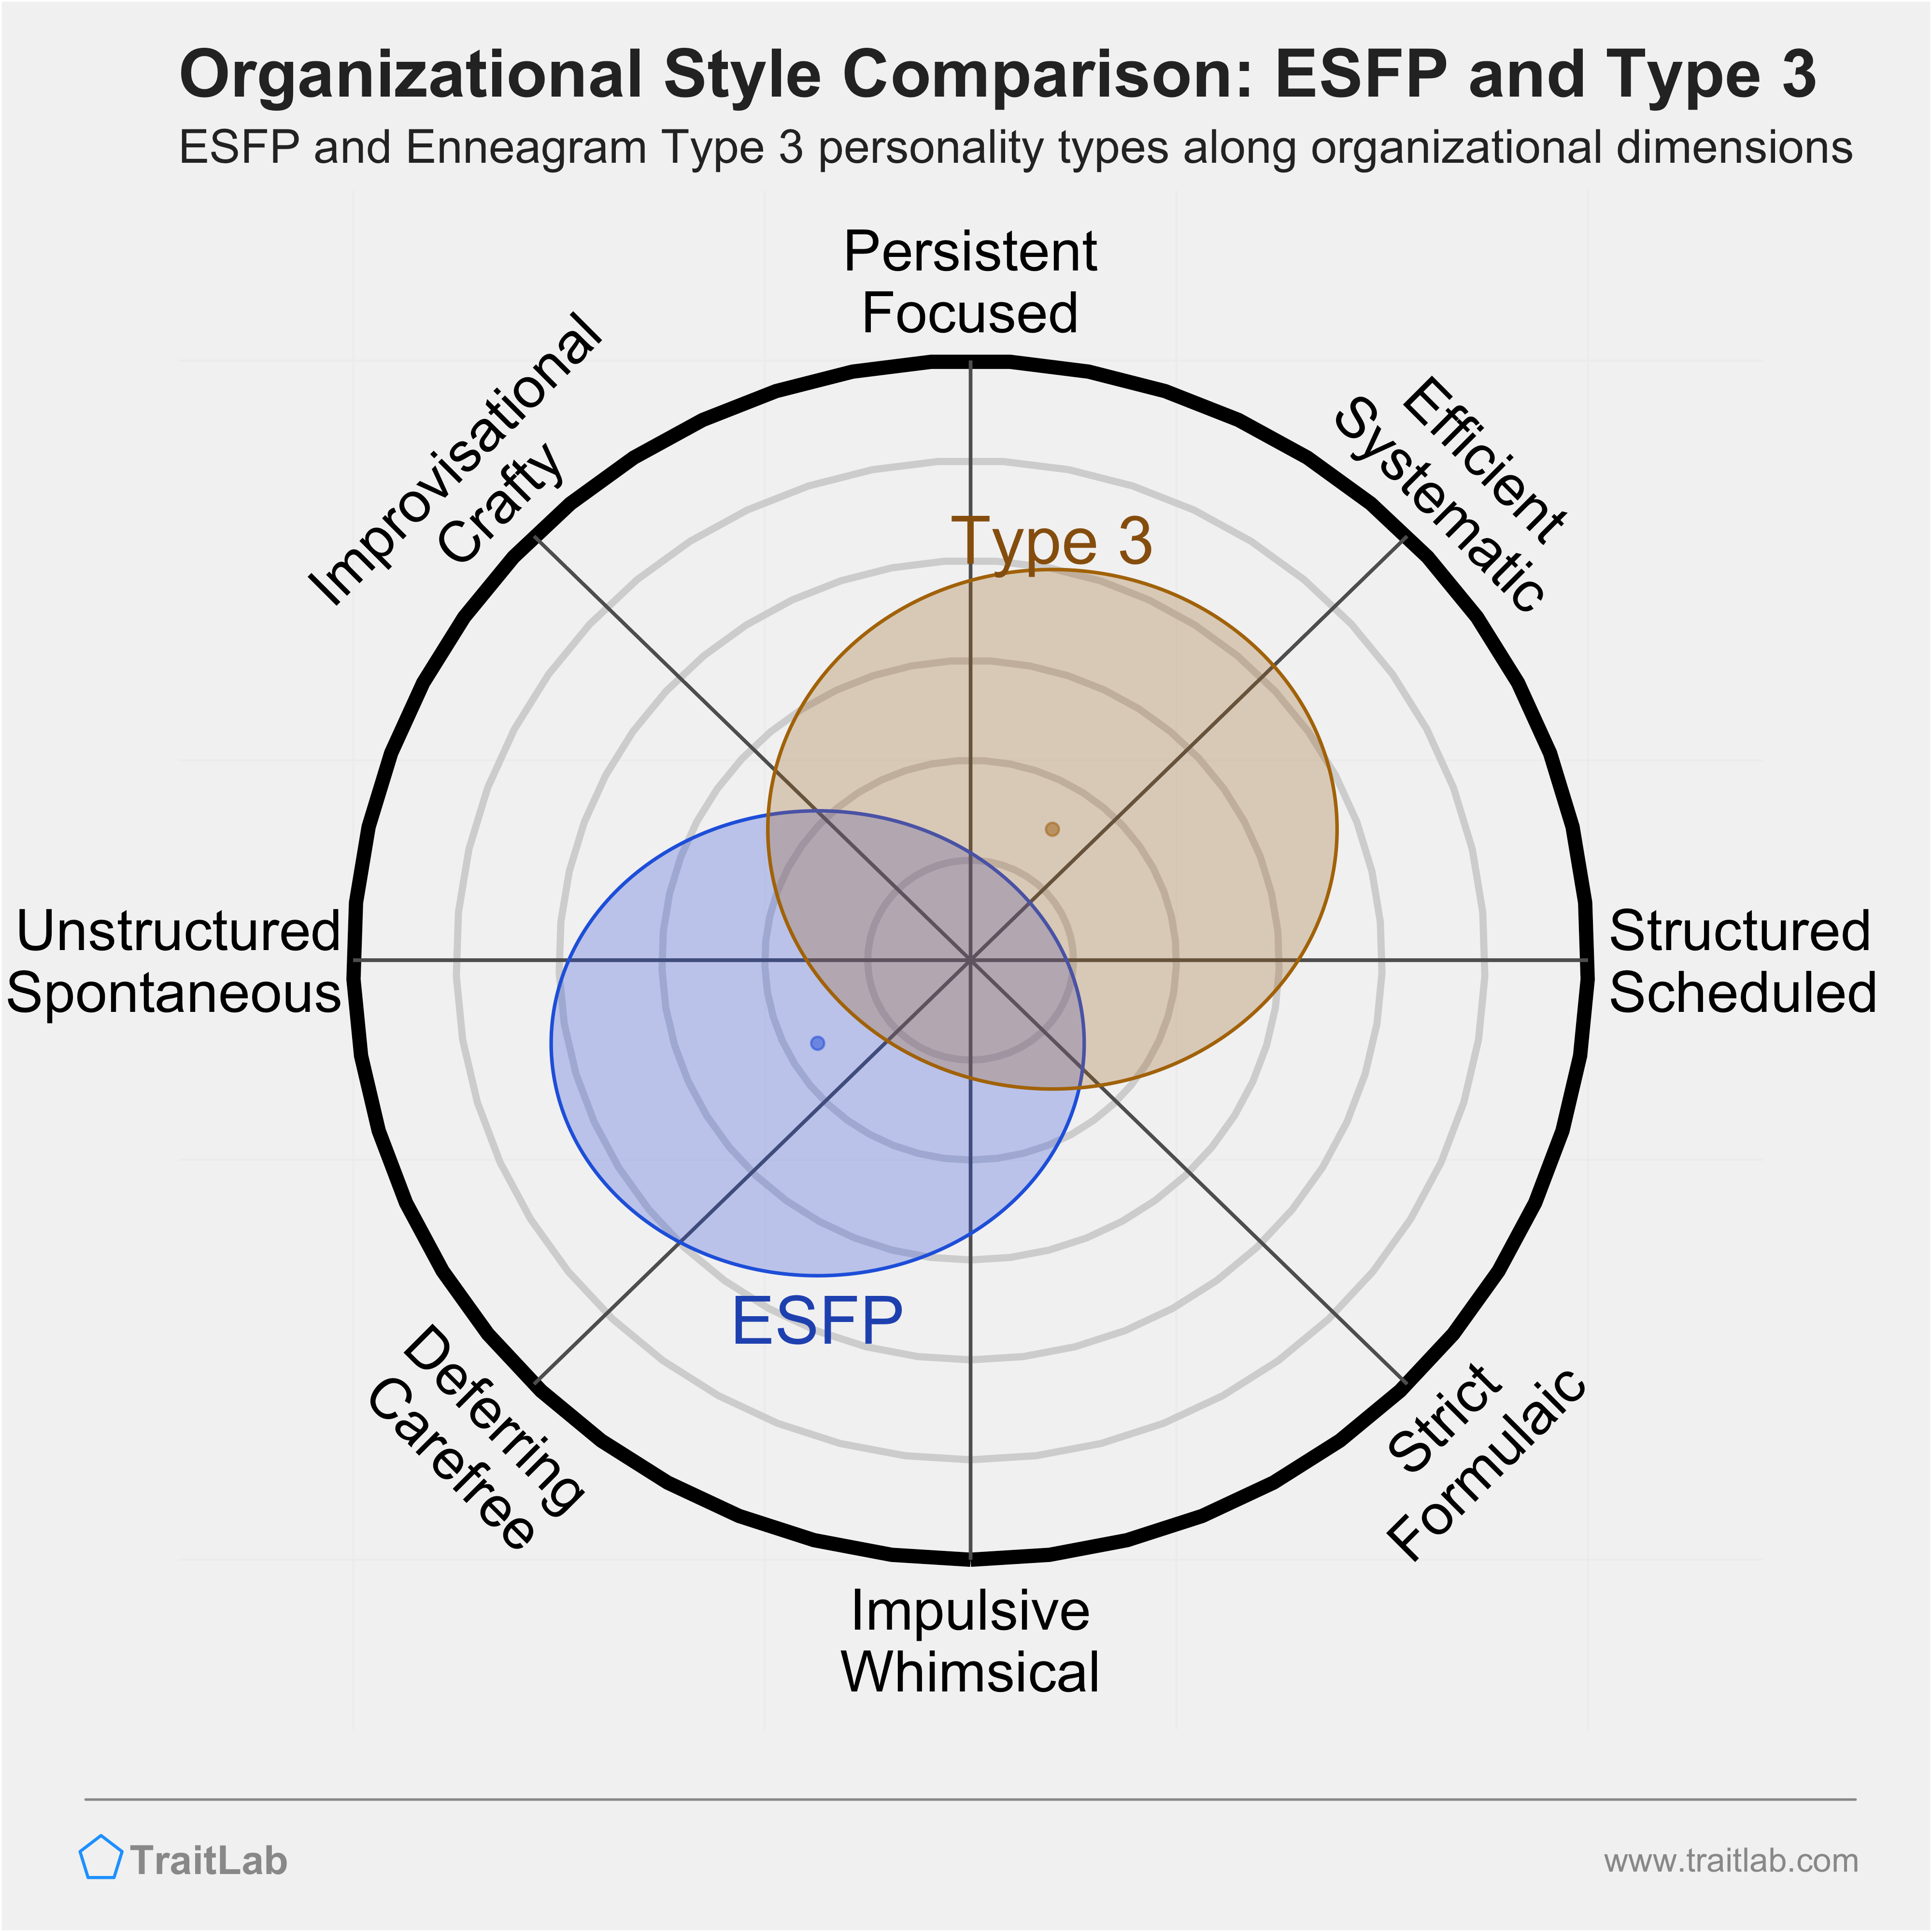 ESFP and Type 3 comparison across organizational dimensions